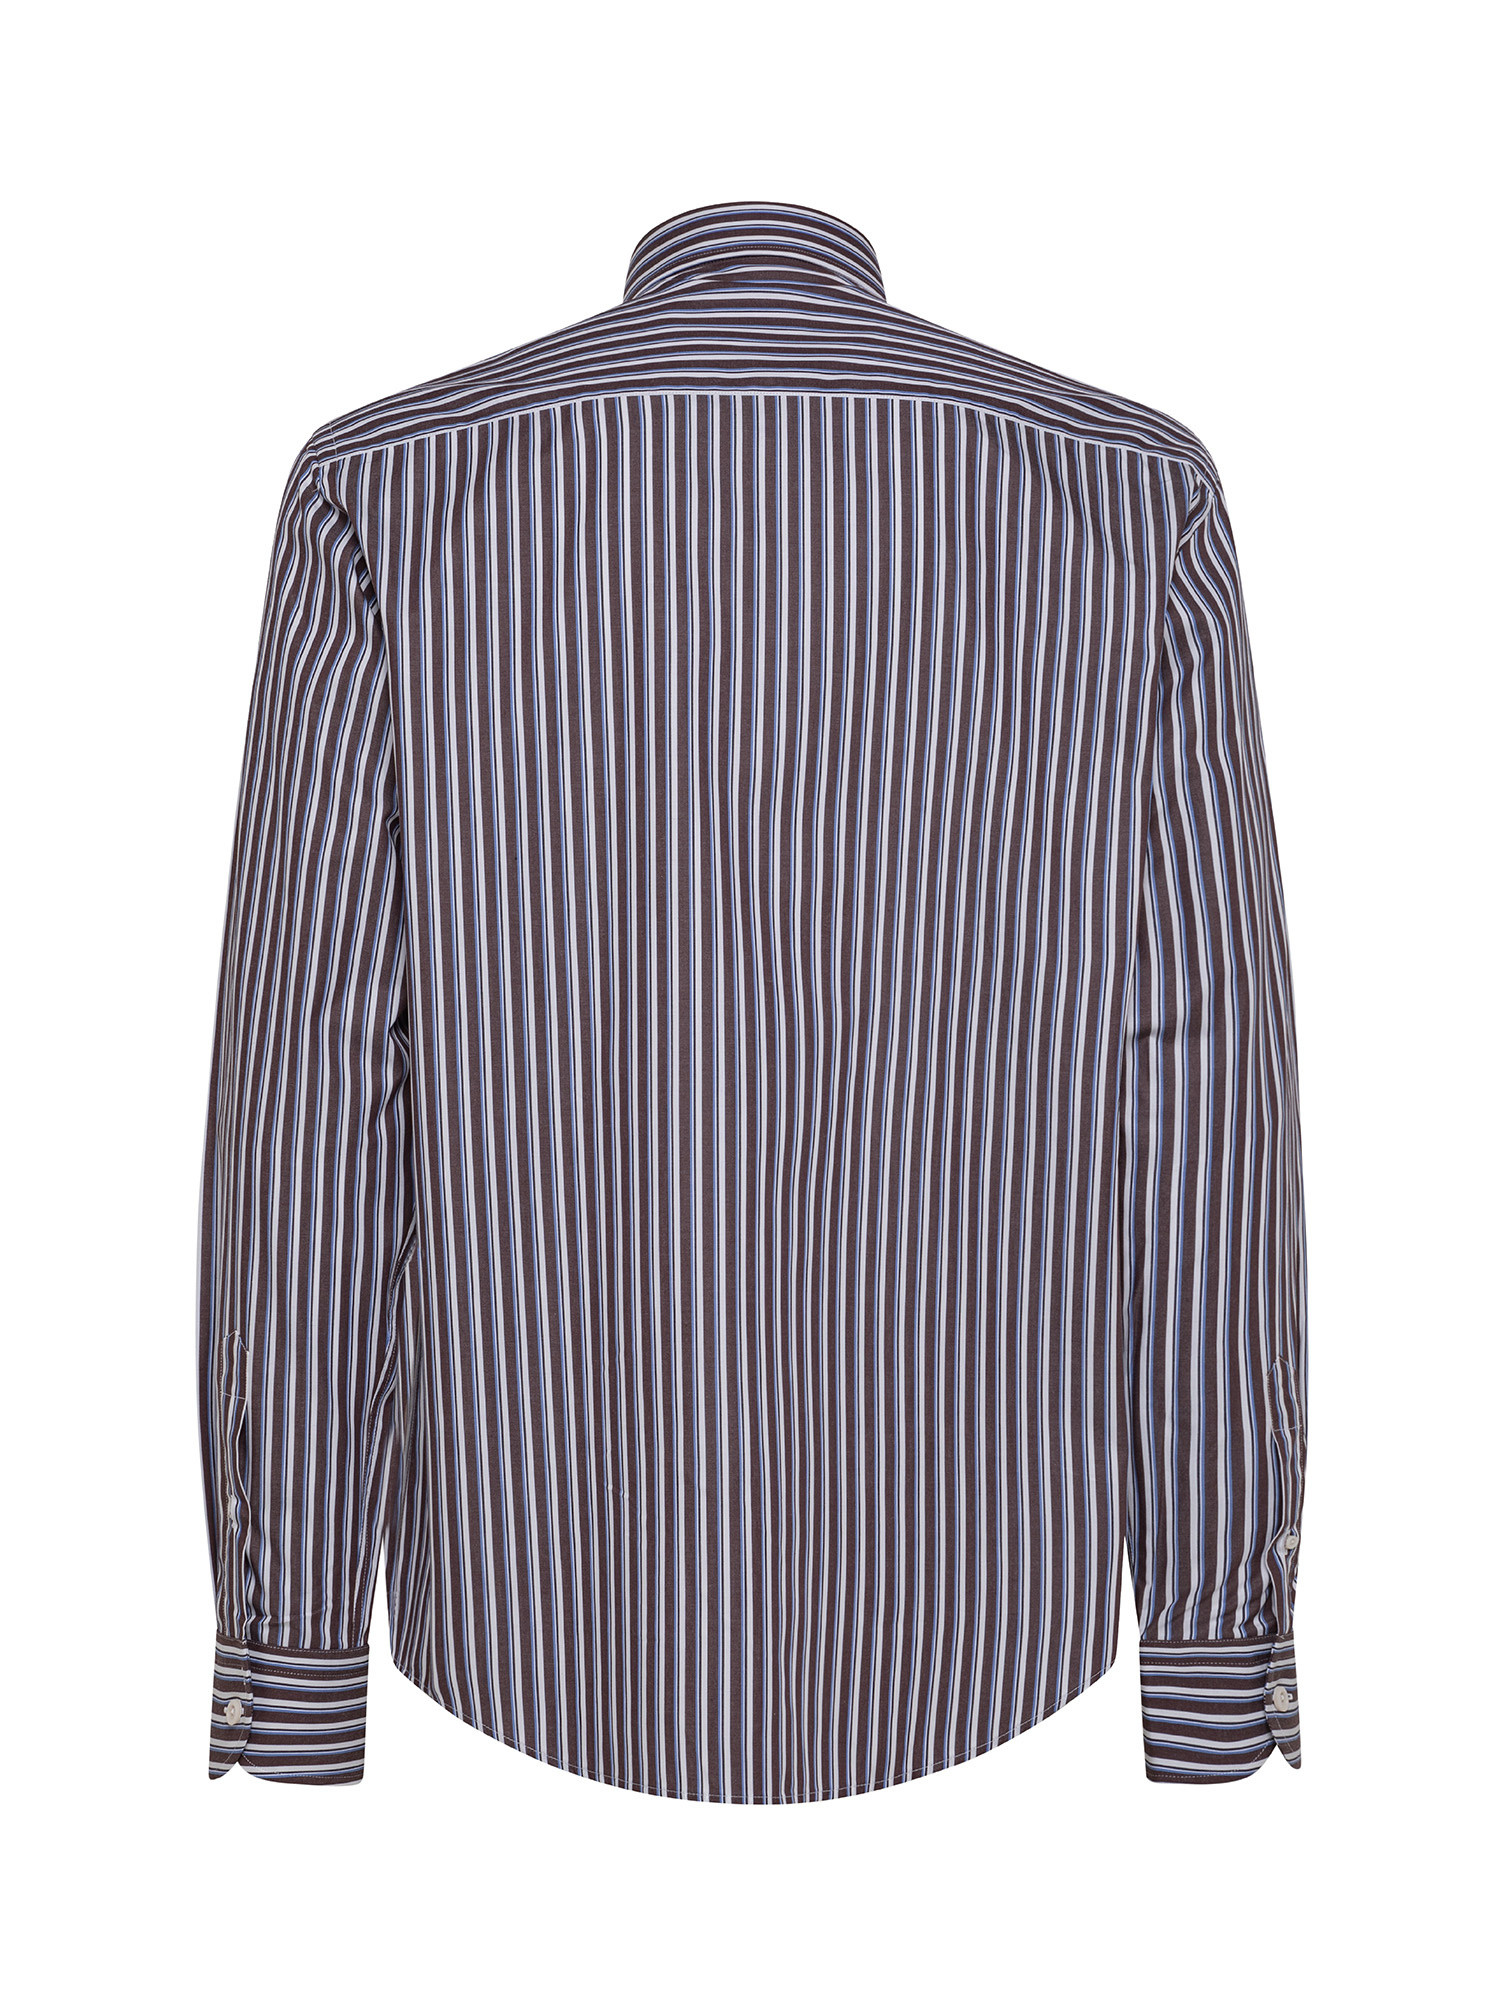 Luca D'Altieri - Camicia a righe tailor fit in puro cotone, Marrone, large image number 2